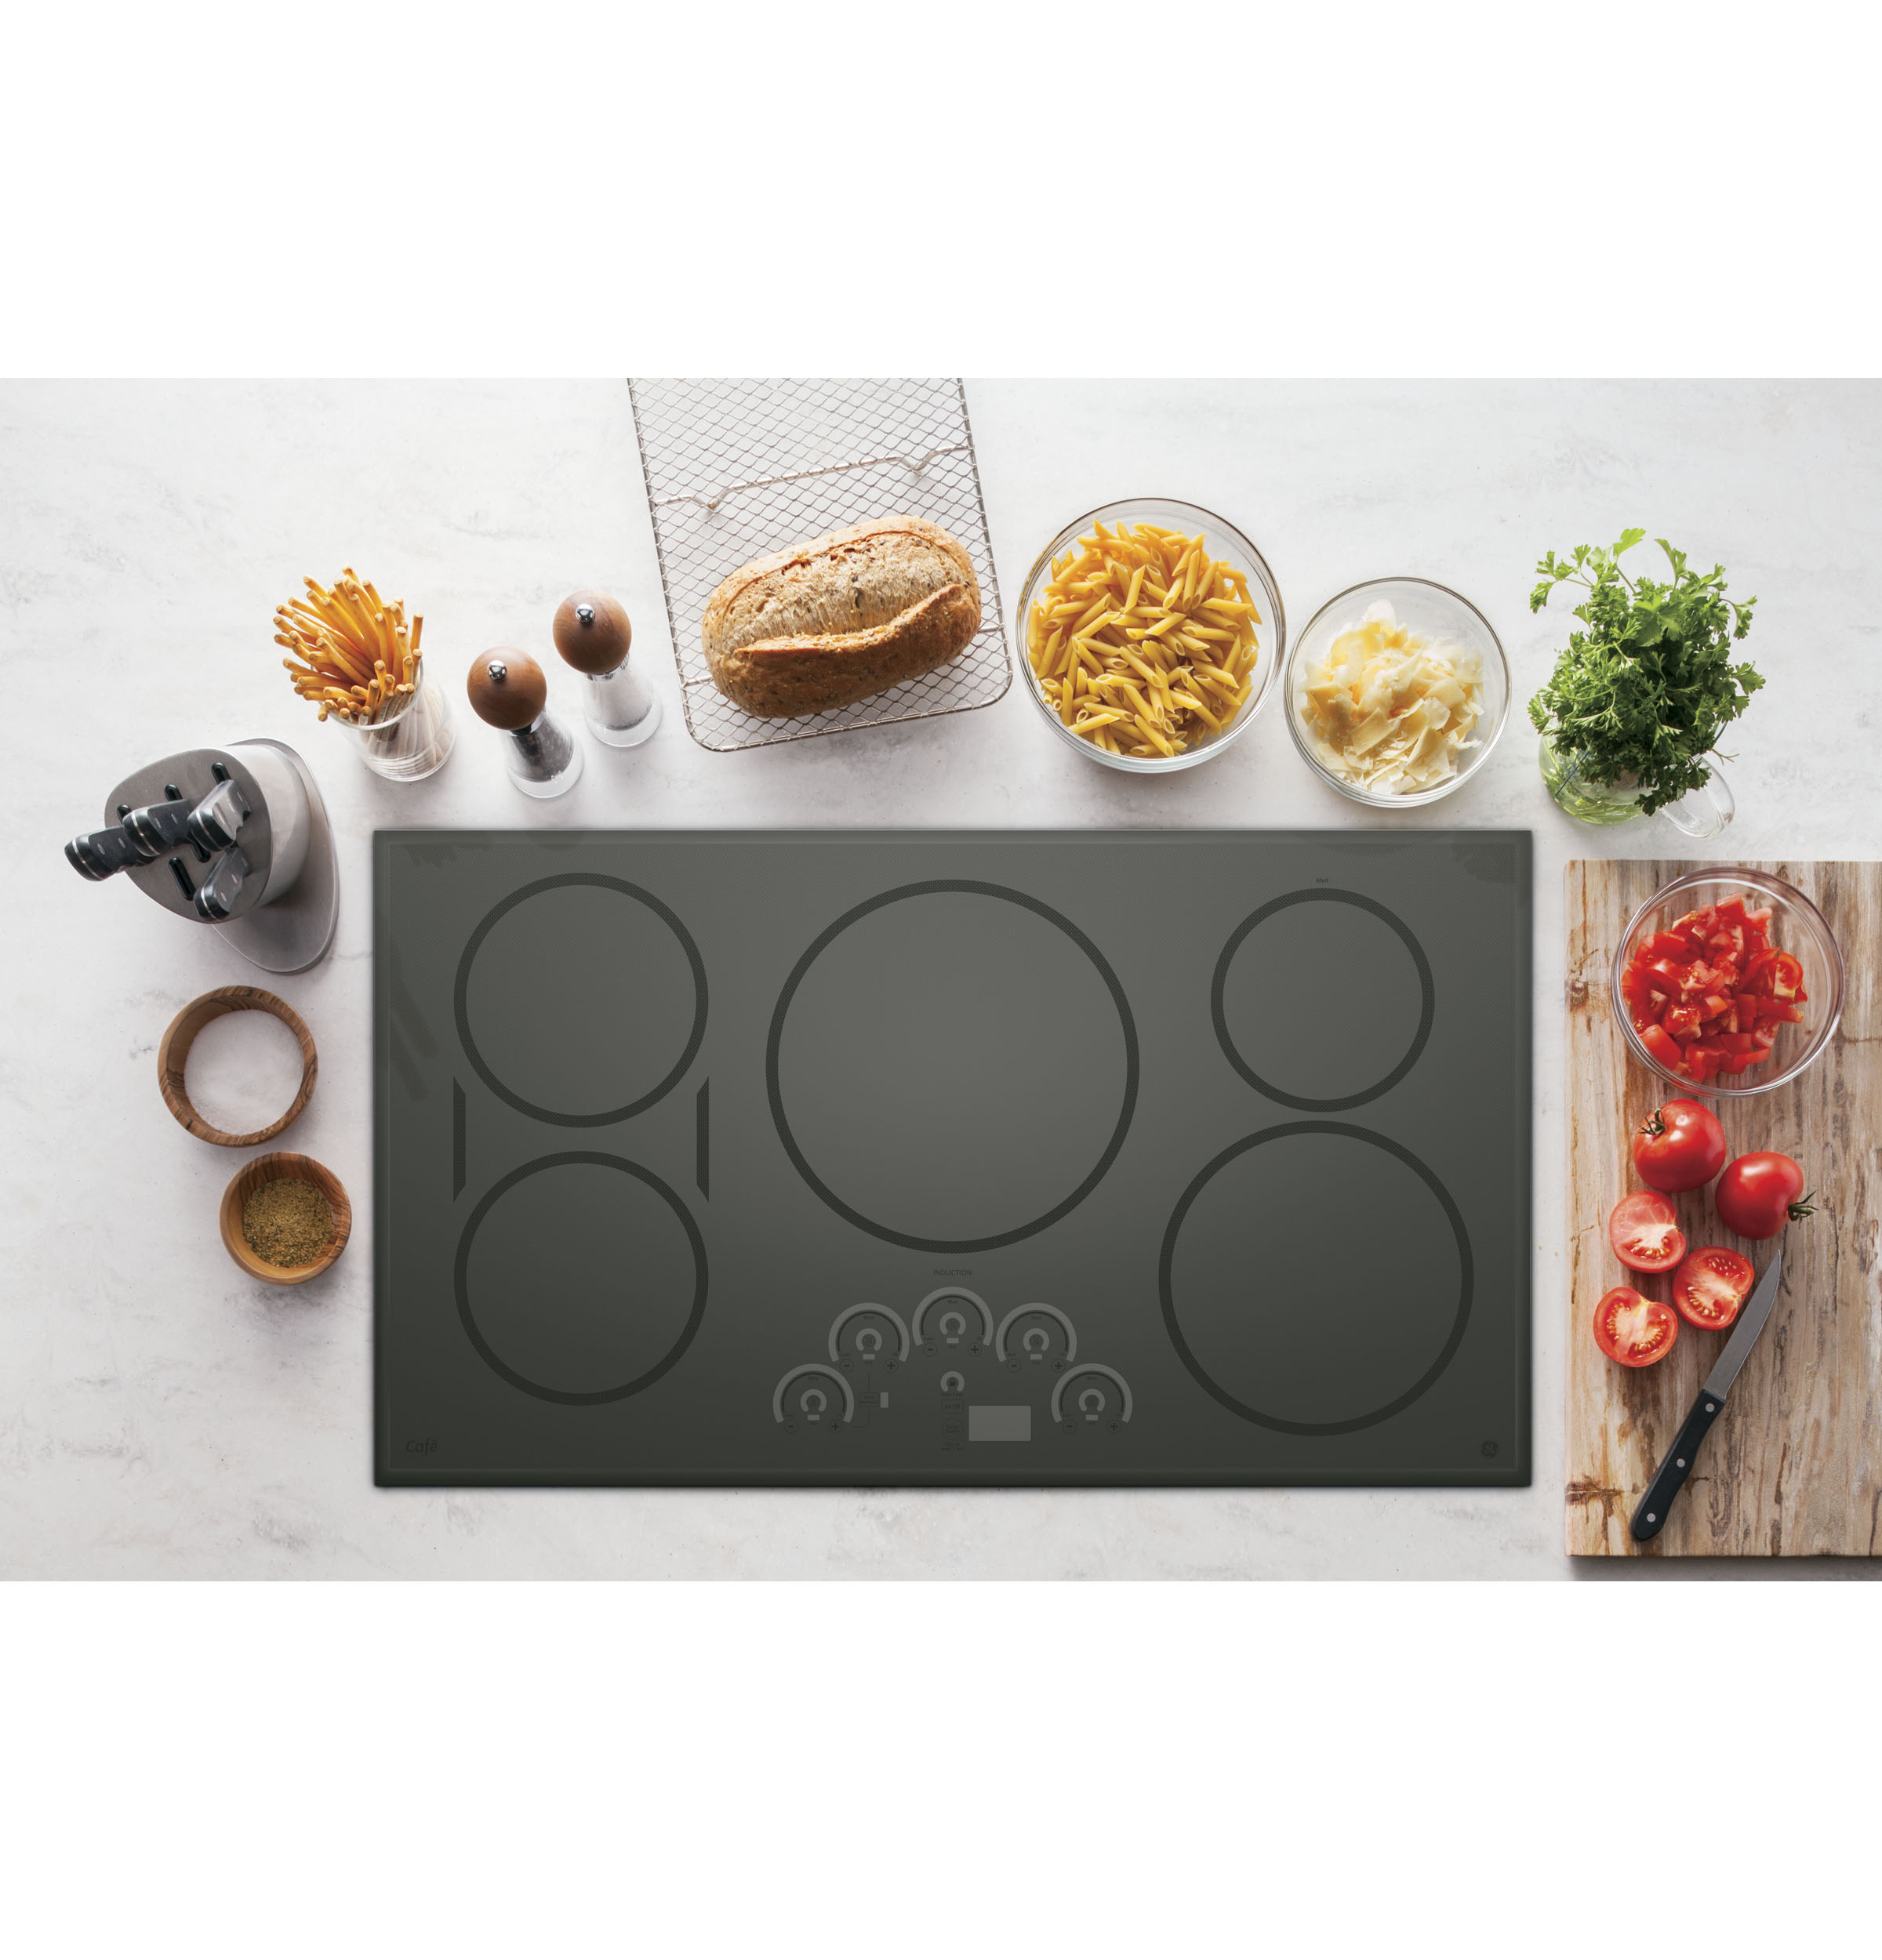 Best Buy: Café 30 Electric Induction Cooktop Stainless Steel CHP95302MSS